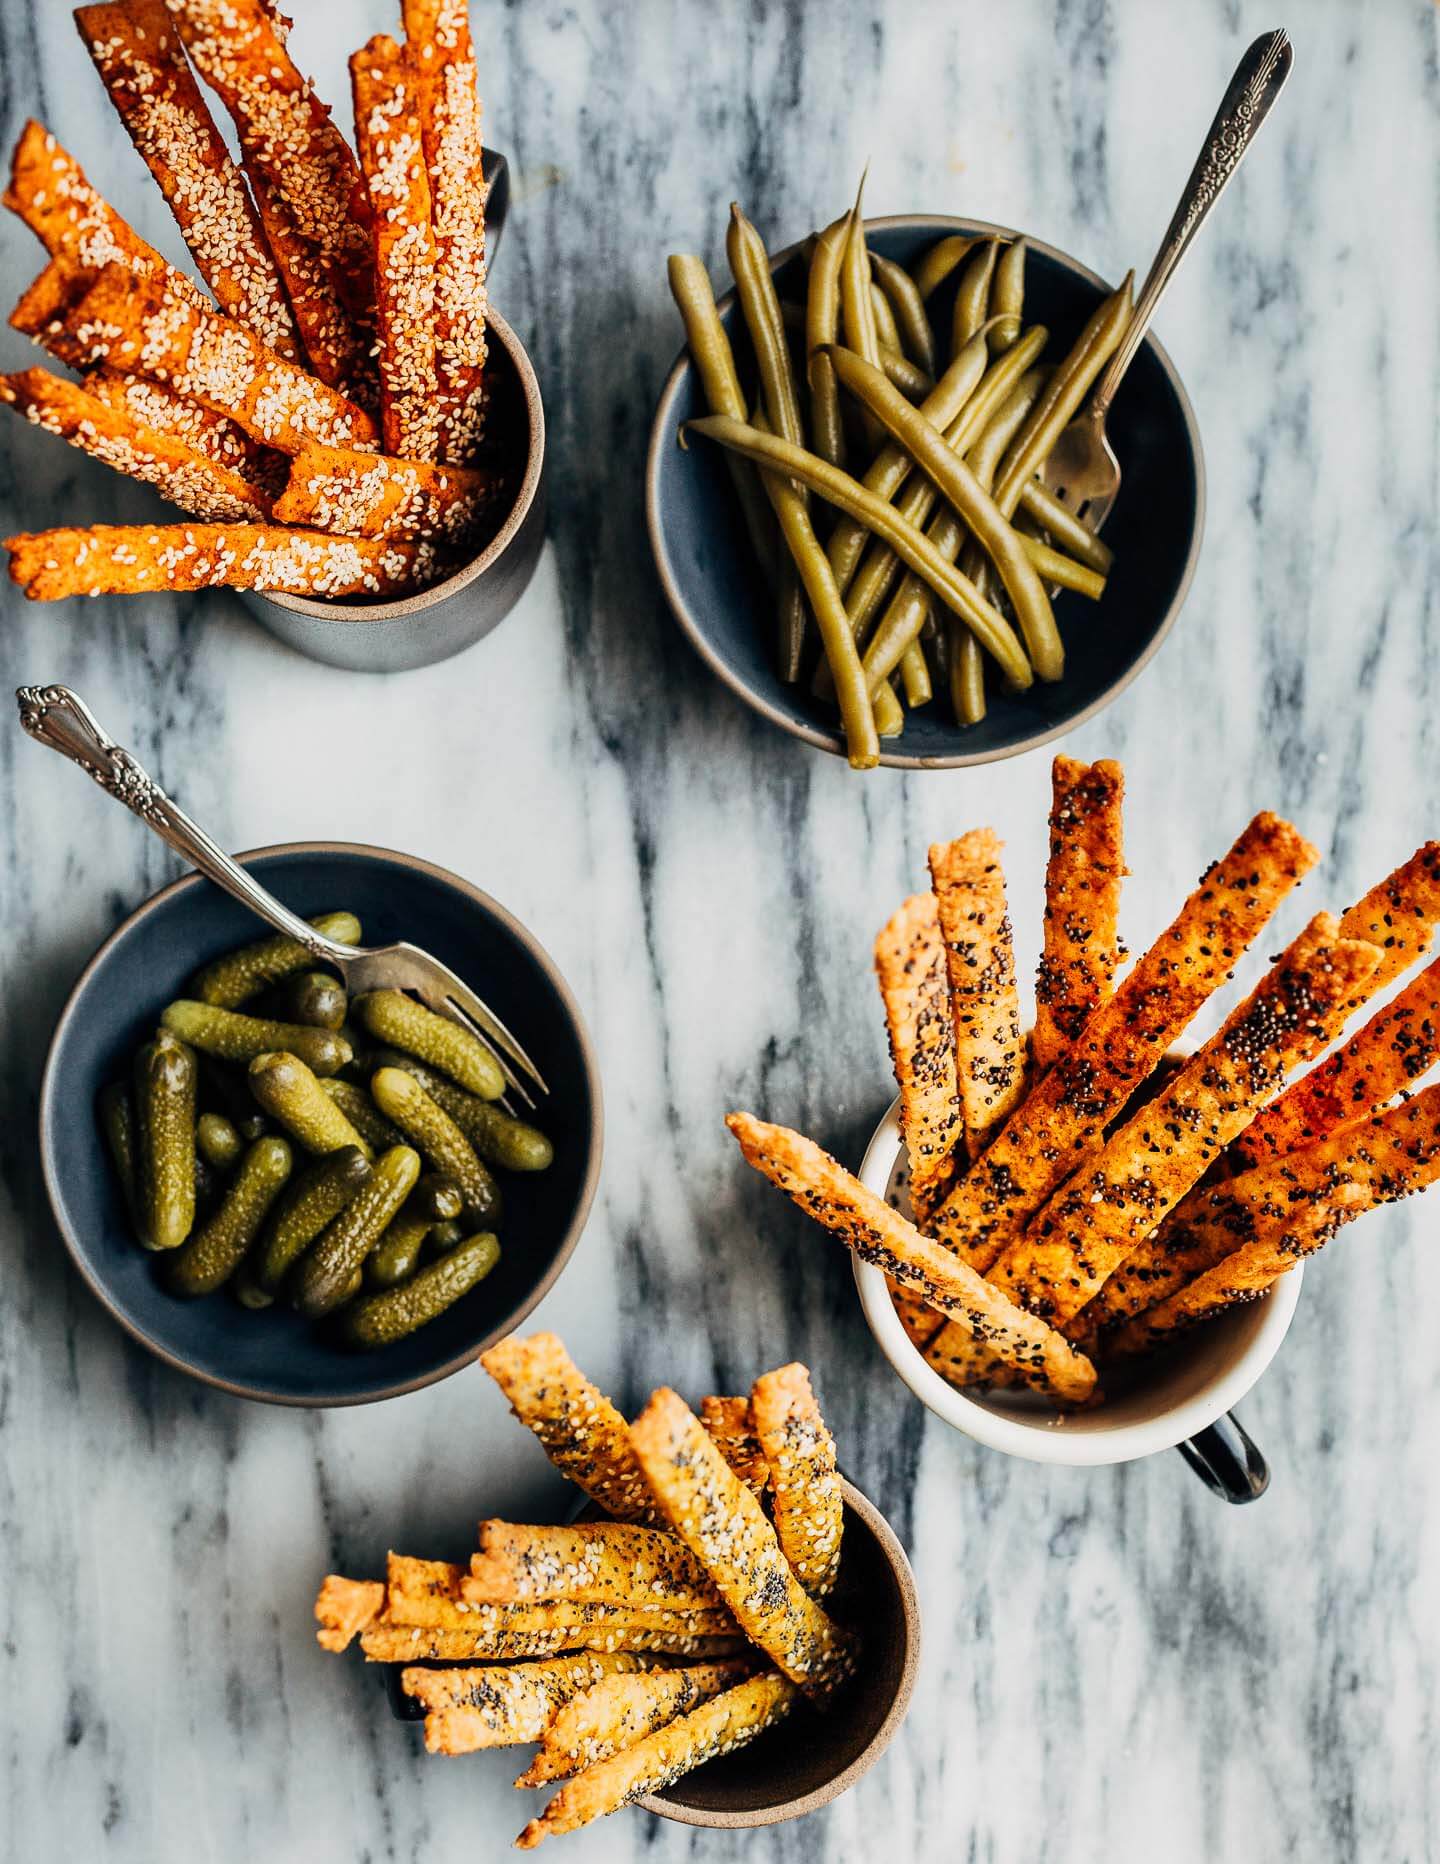 These irresistibly delicious seeded cheese straws have it all: vivid color, unexpected flavor, buttery texture, and the nutty crunch of your favorite seeds. Mix and match flavors and seeds to create your own!